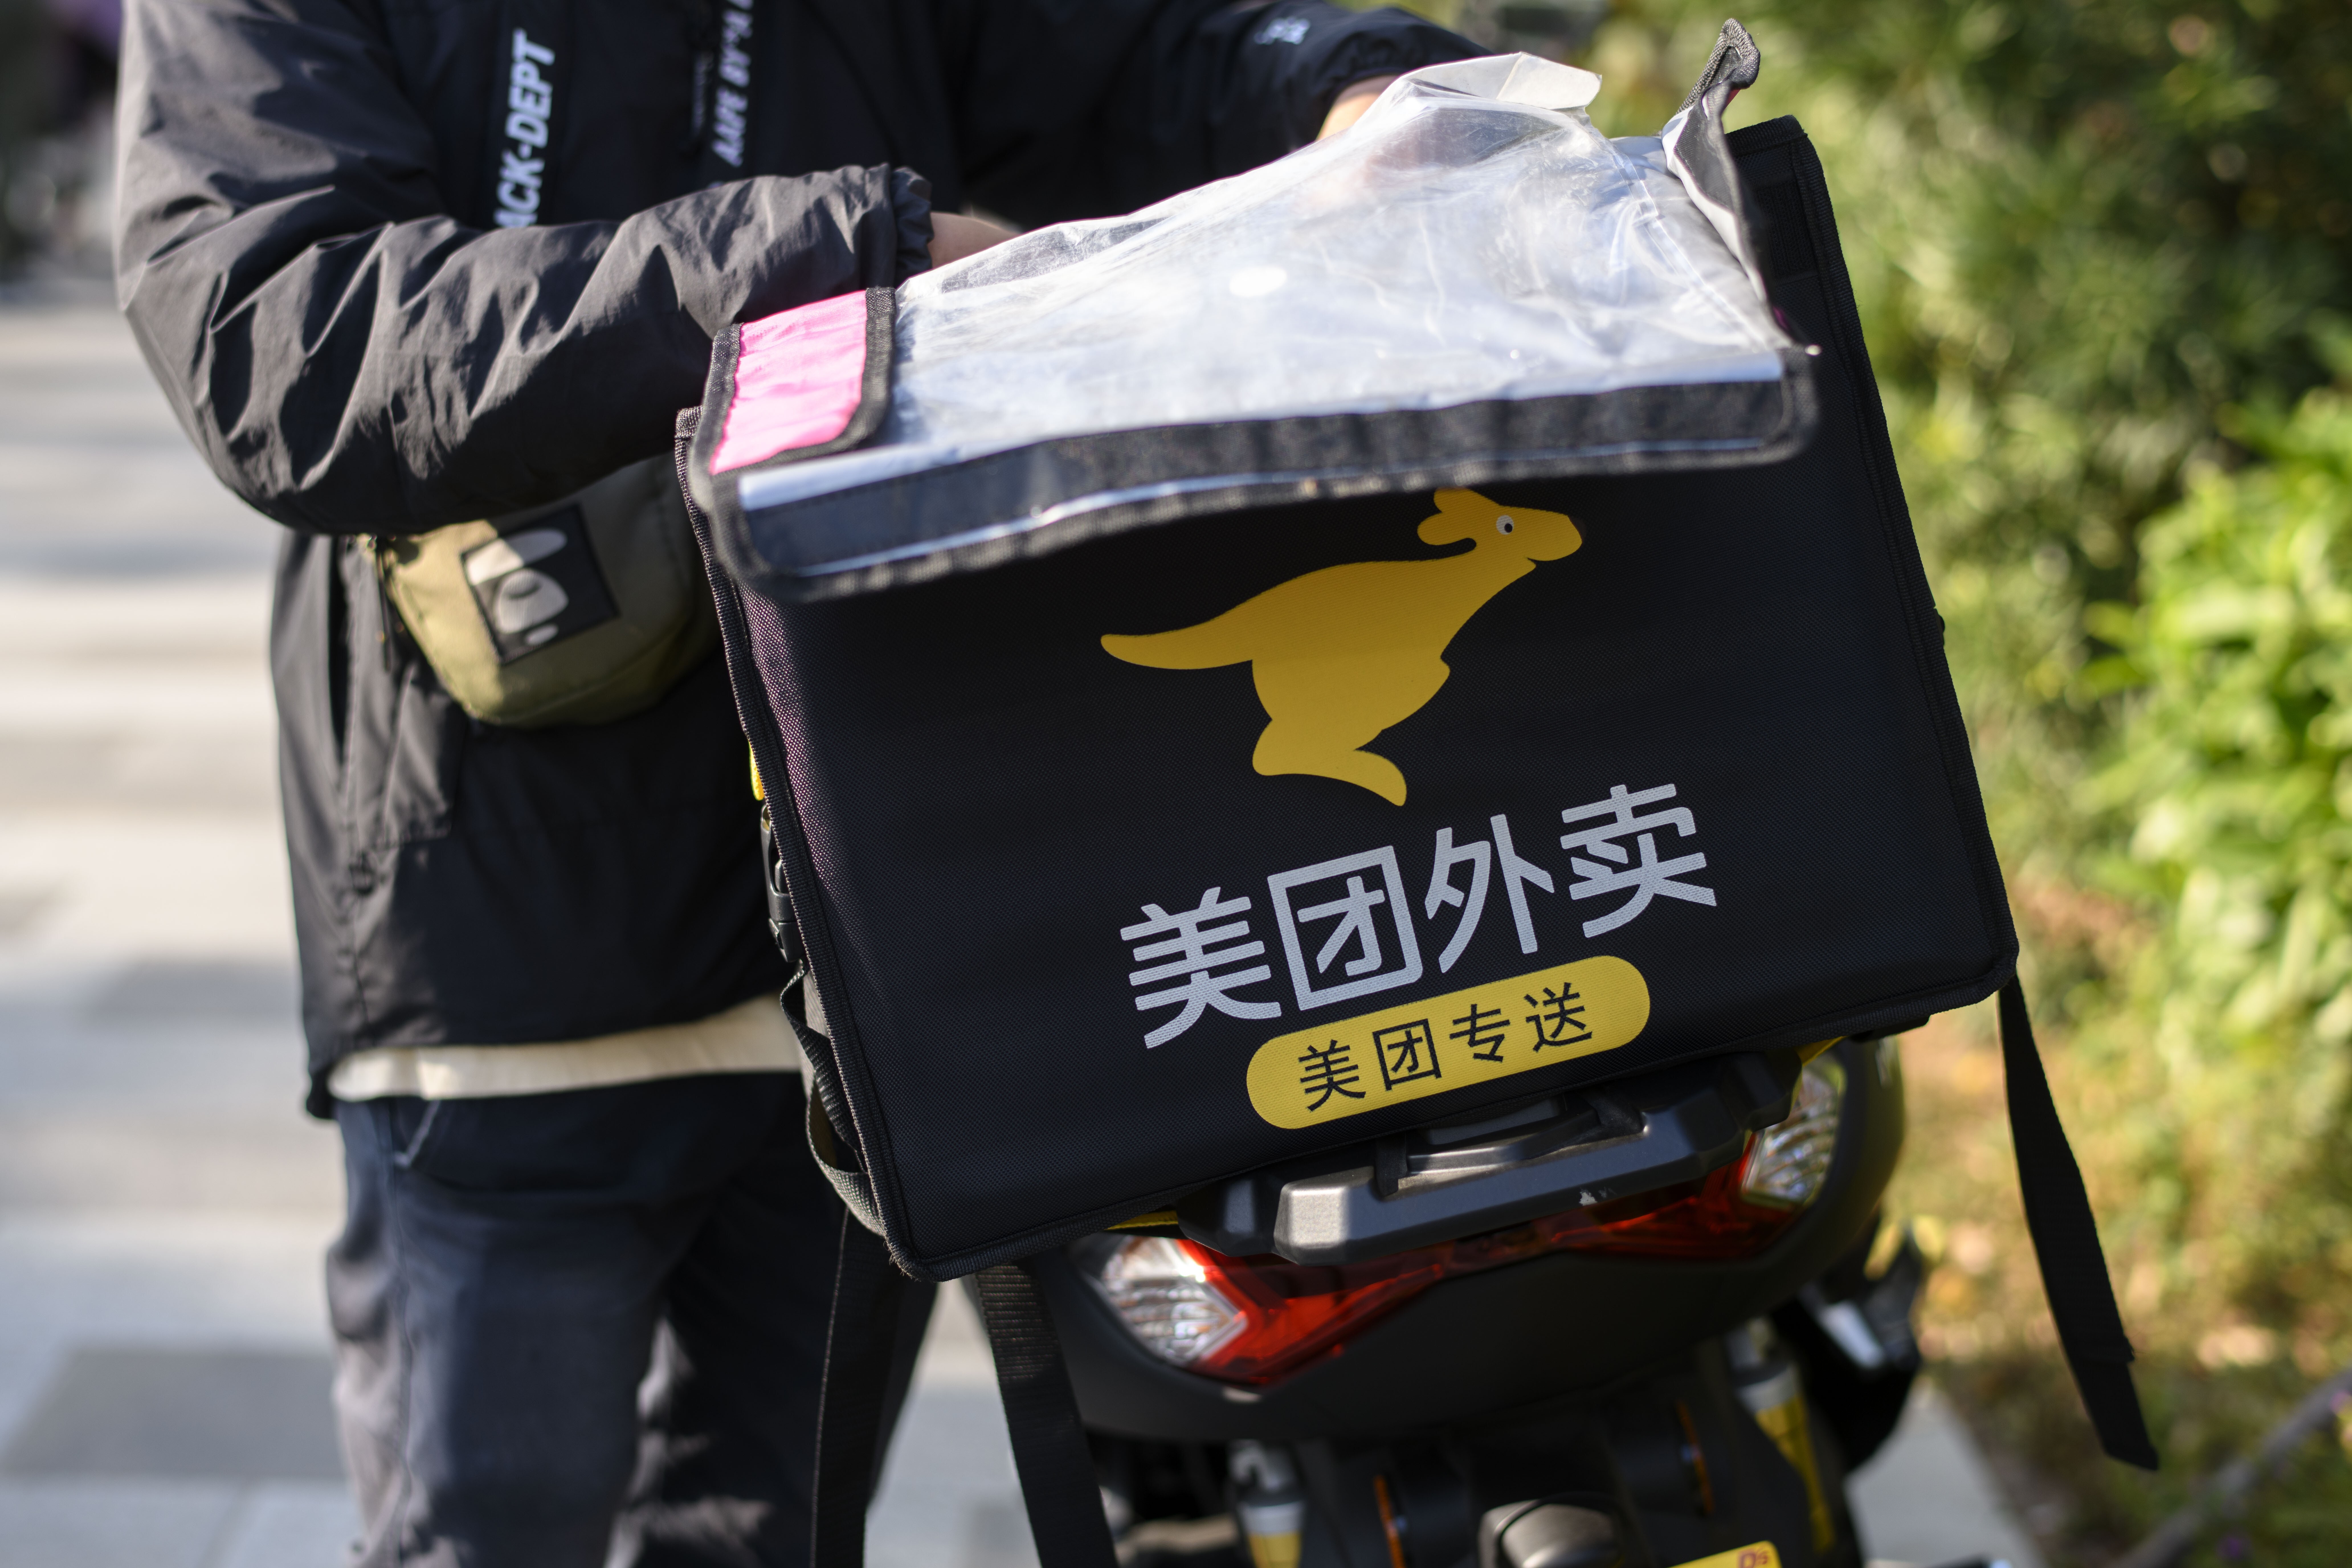 Meituan remains under an antitrust investigation by the State Administration for Market Regulation. Photo: Warton Li